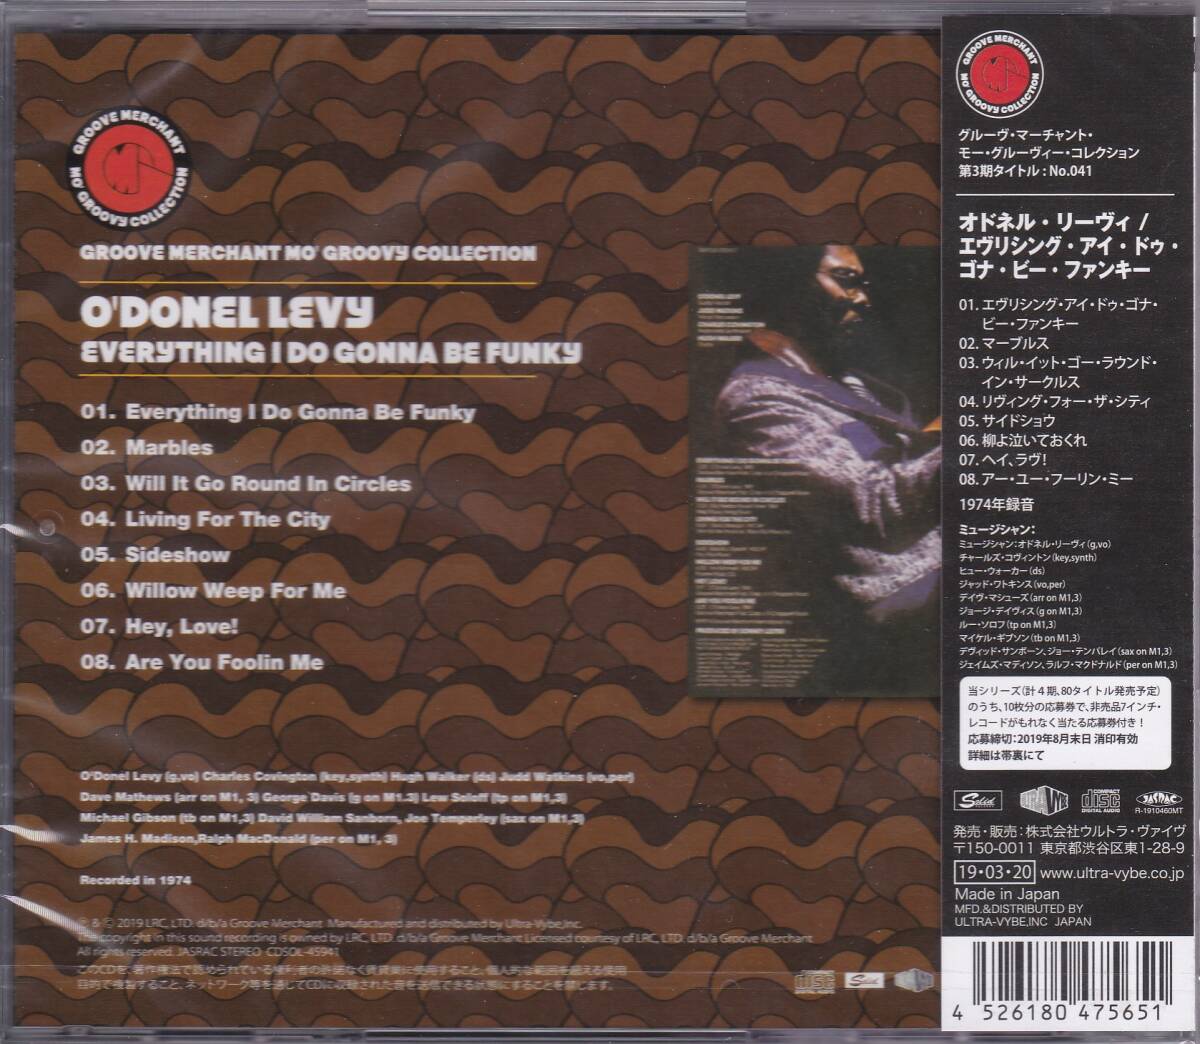 Rare Groove/Jazz Funk■O'DONEL LEVY / Everything I Do Gonna Be Funky (1974) 廃盤 Stevie Wonder & Blue Magic名曲カヴァー収録!!_画像2